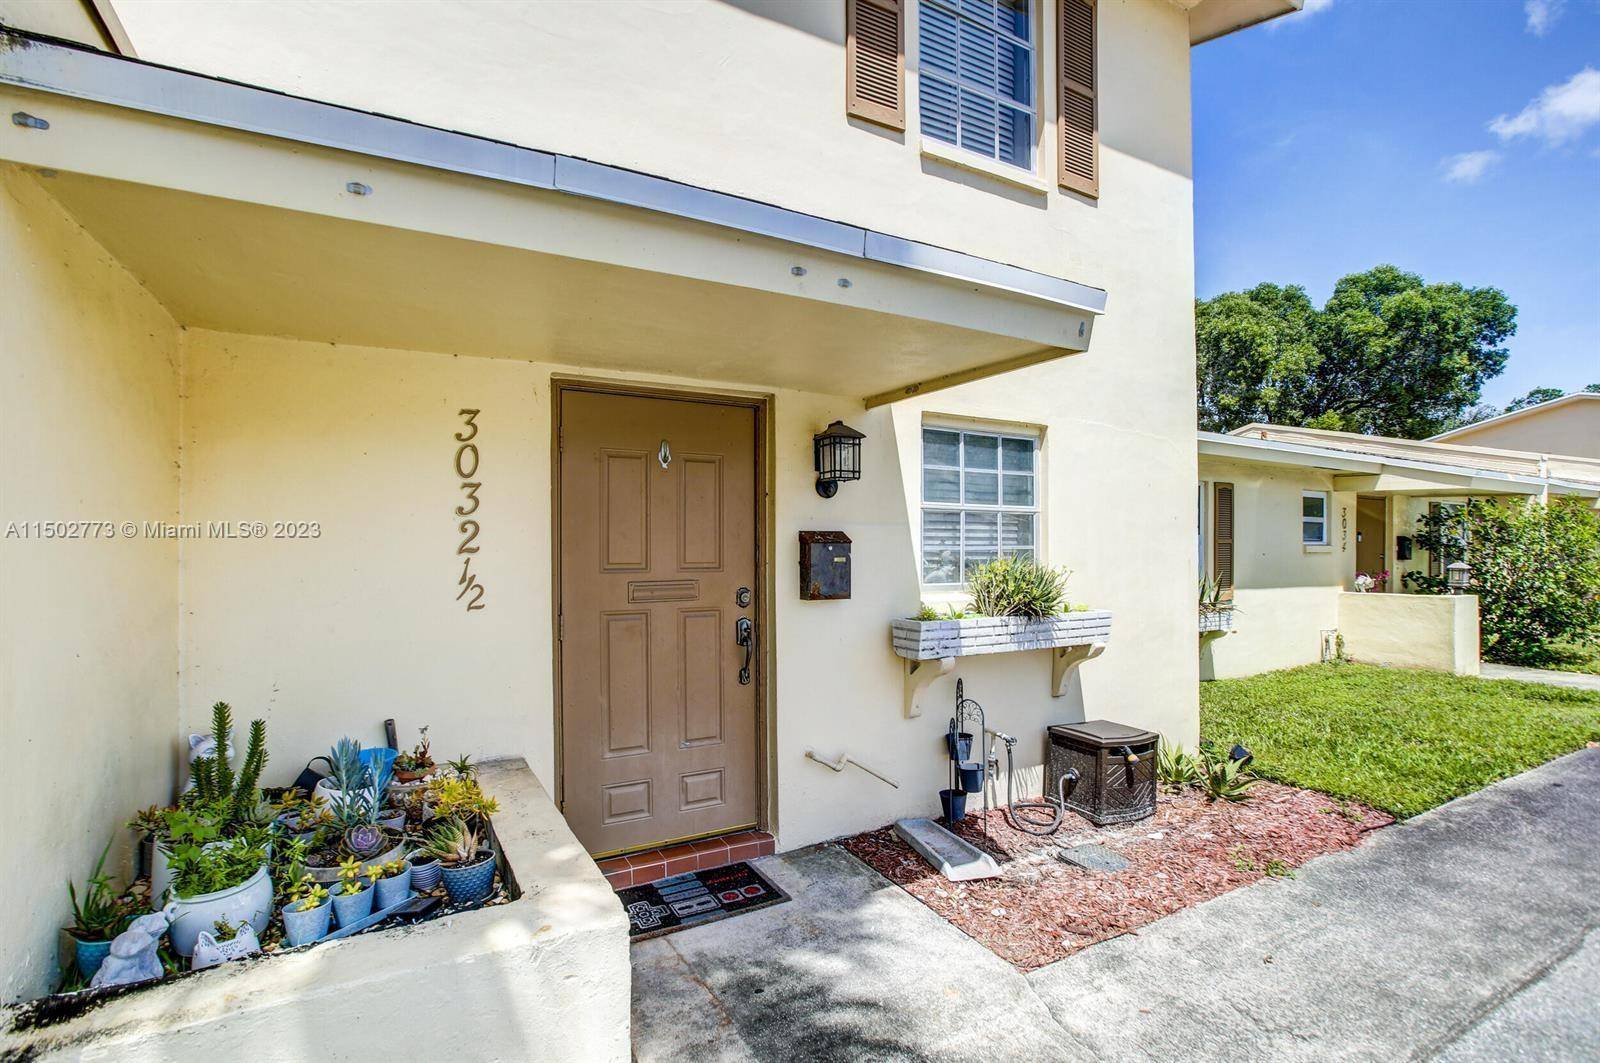 Spacious 3bd 1. 5 bath townhouse with Updated kitchen.